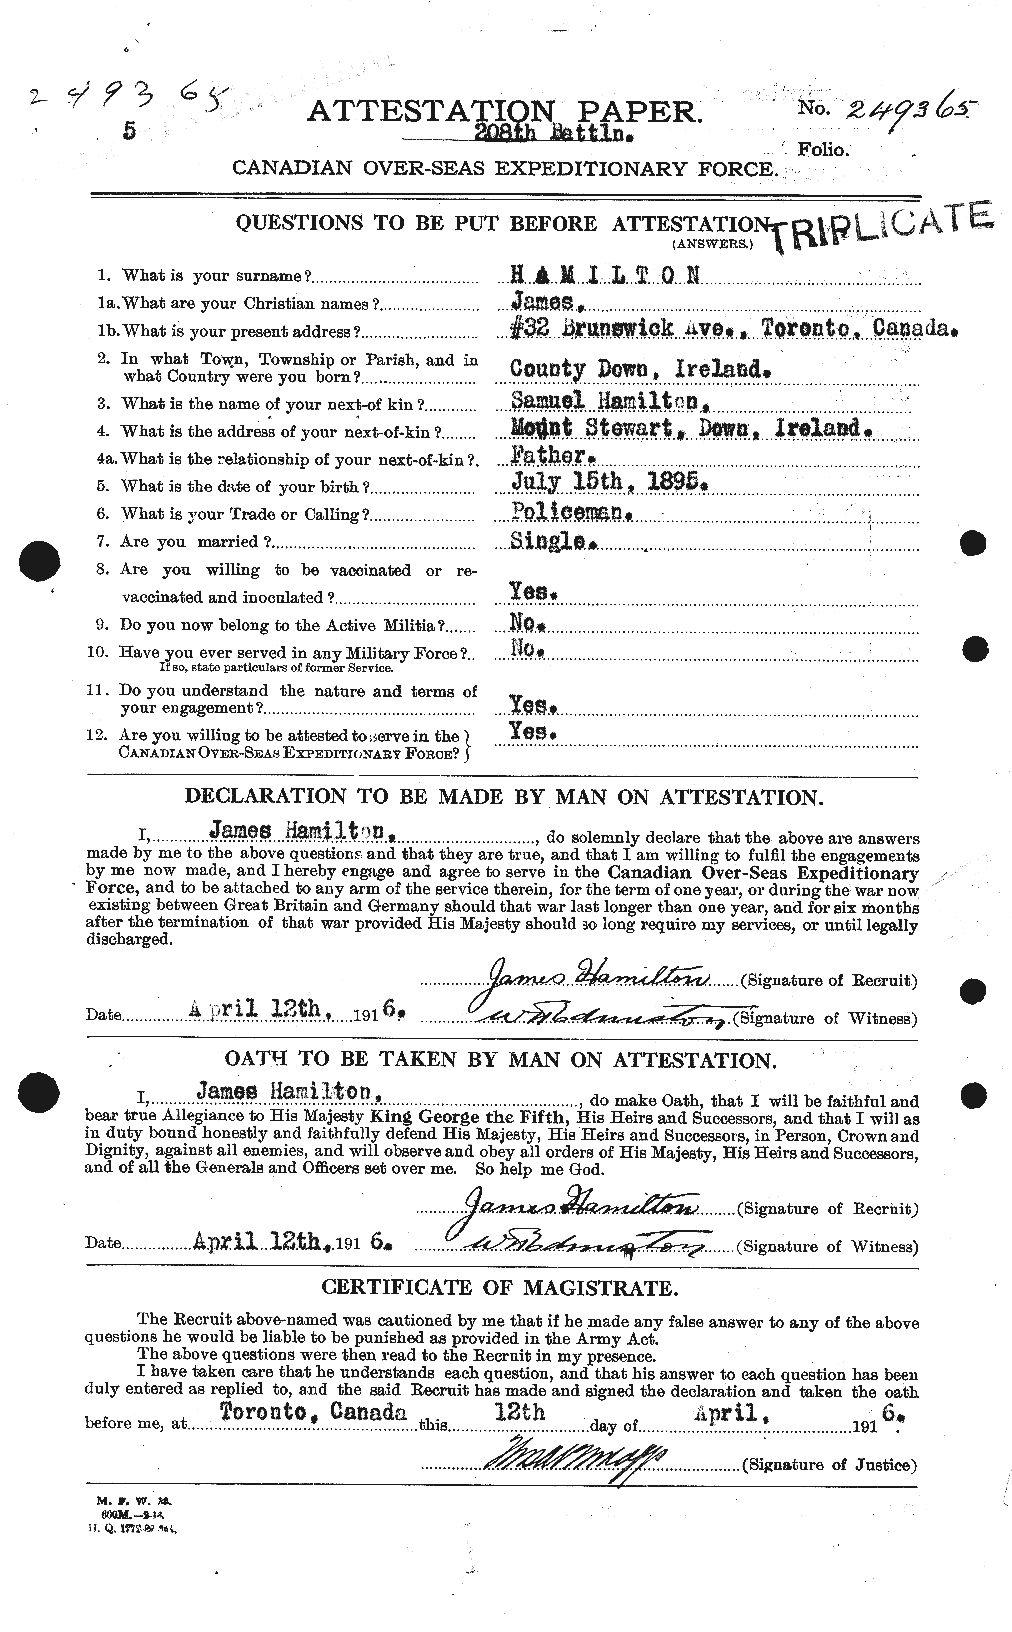 Personnel Records of the First World War - CEF 372958a